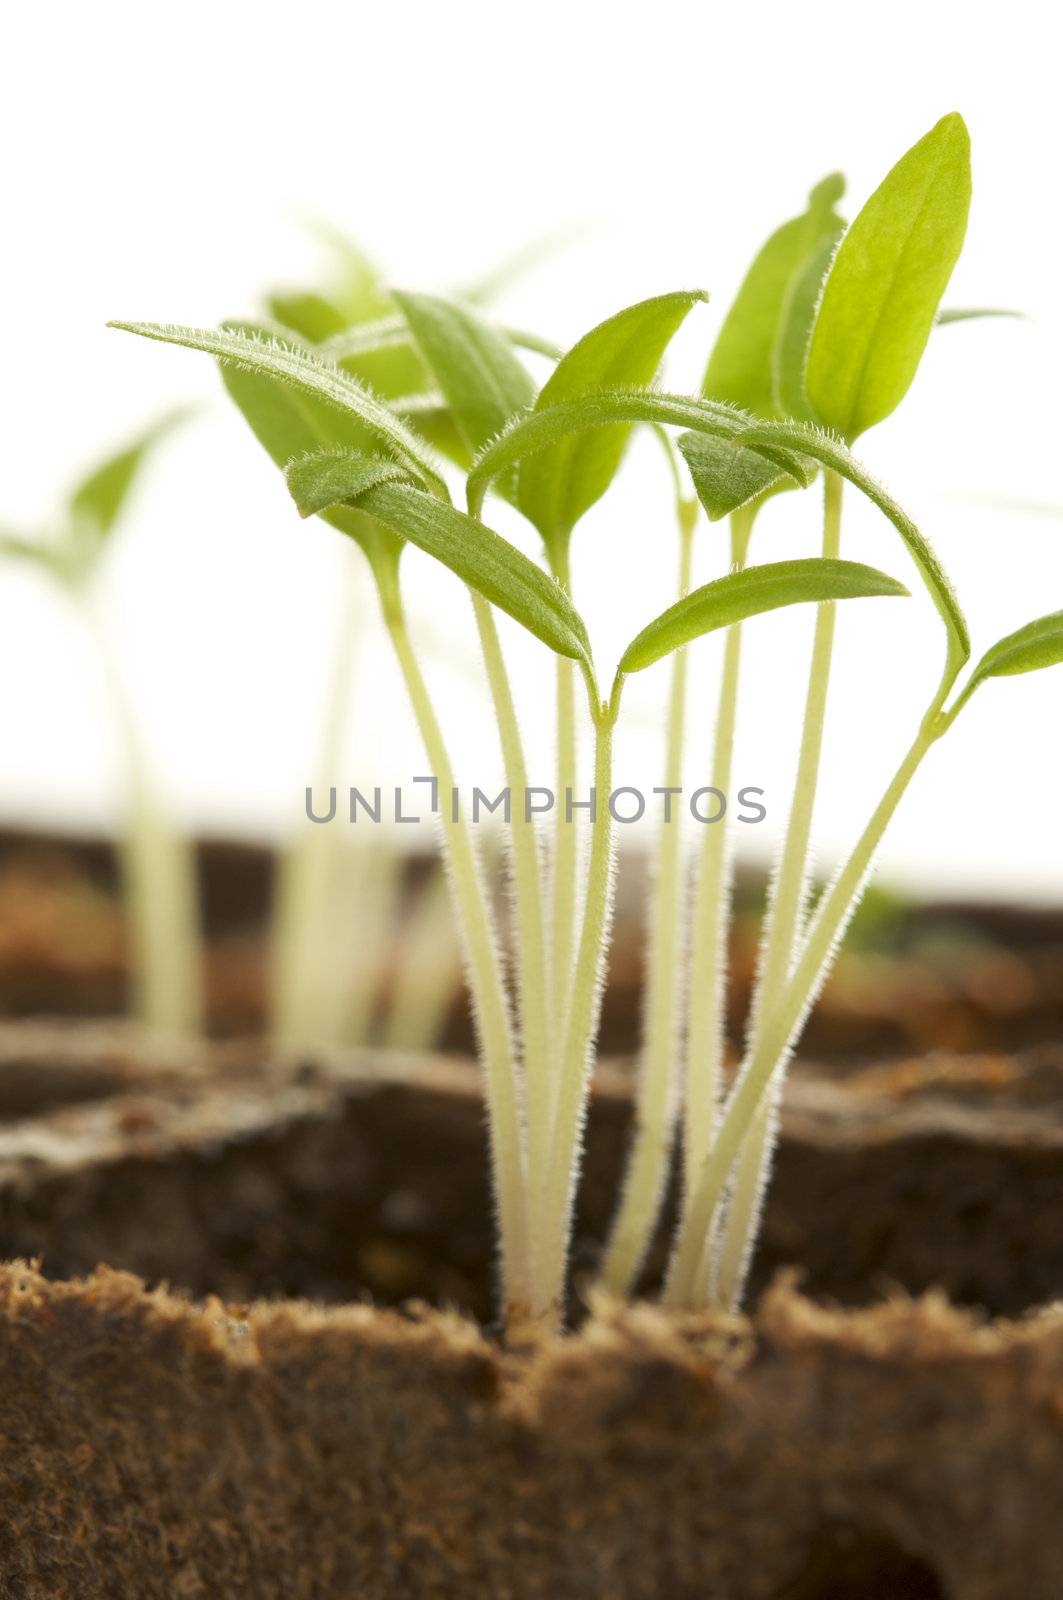 Backlit Sprouting Plants with White Background.